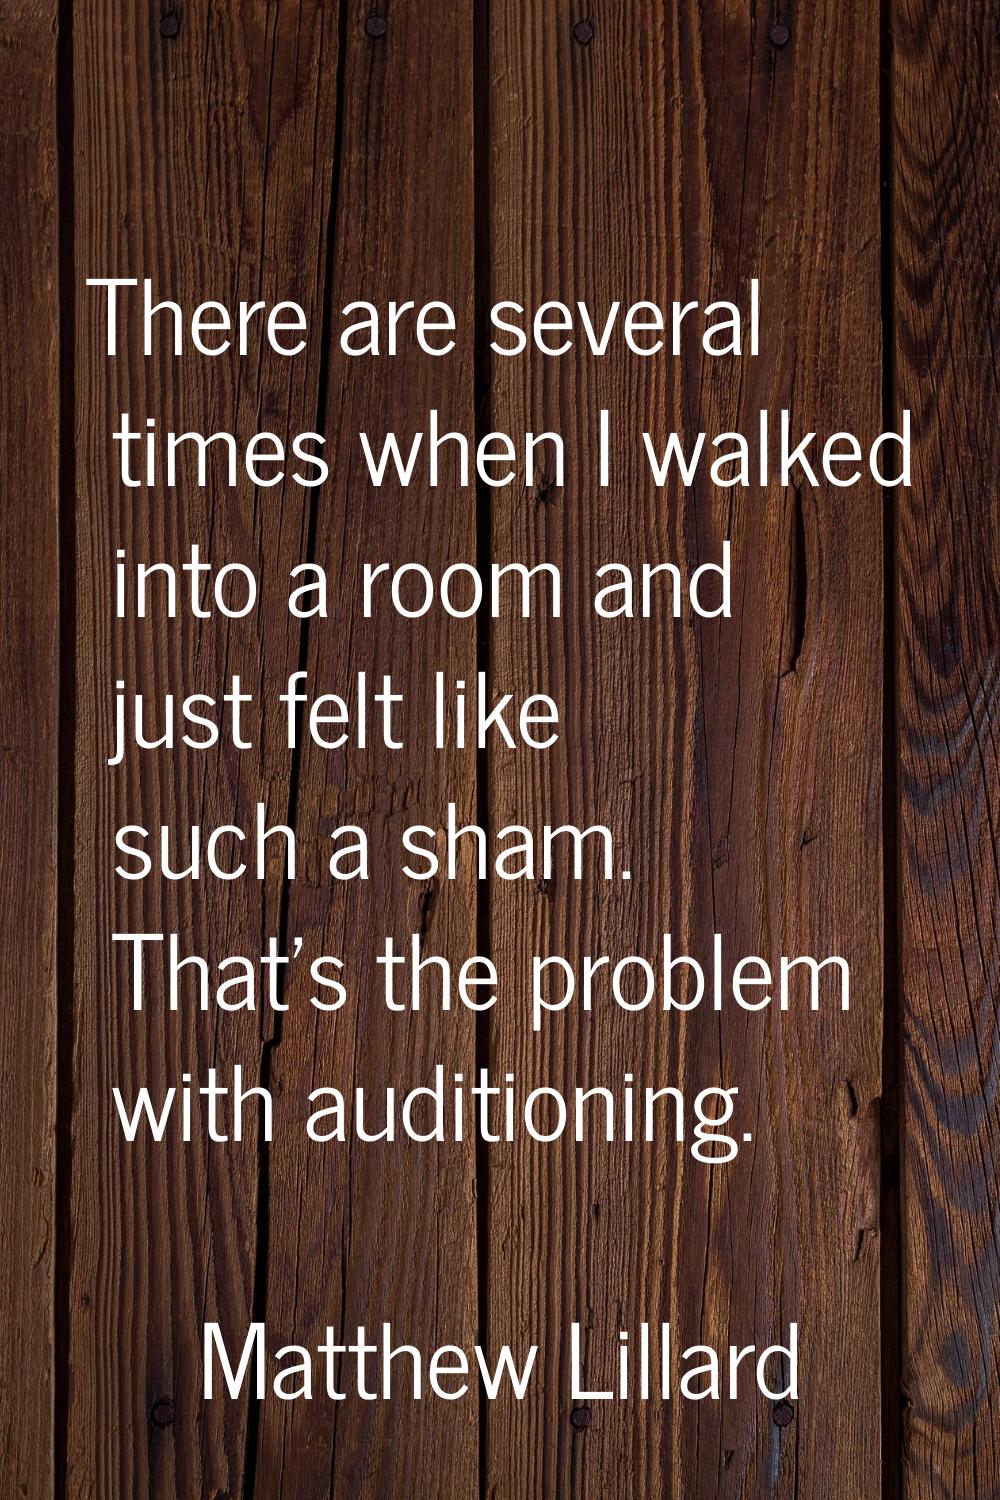 There are several times when I walked into a room and just felt like such a sham. That's the proble